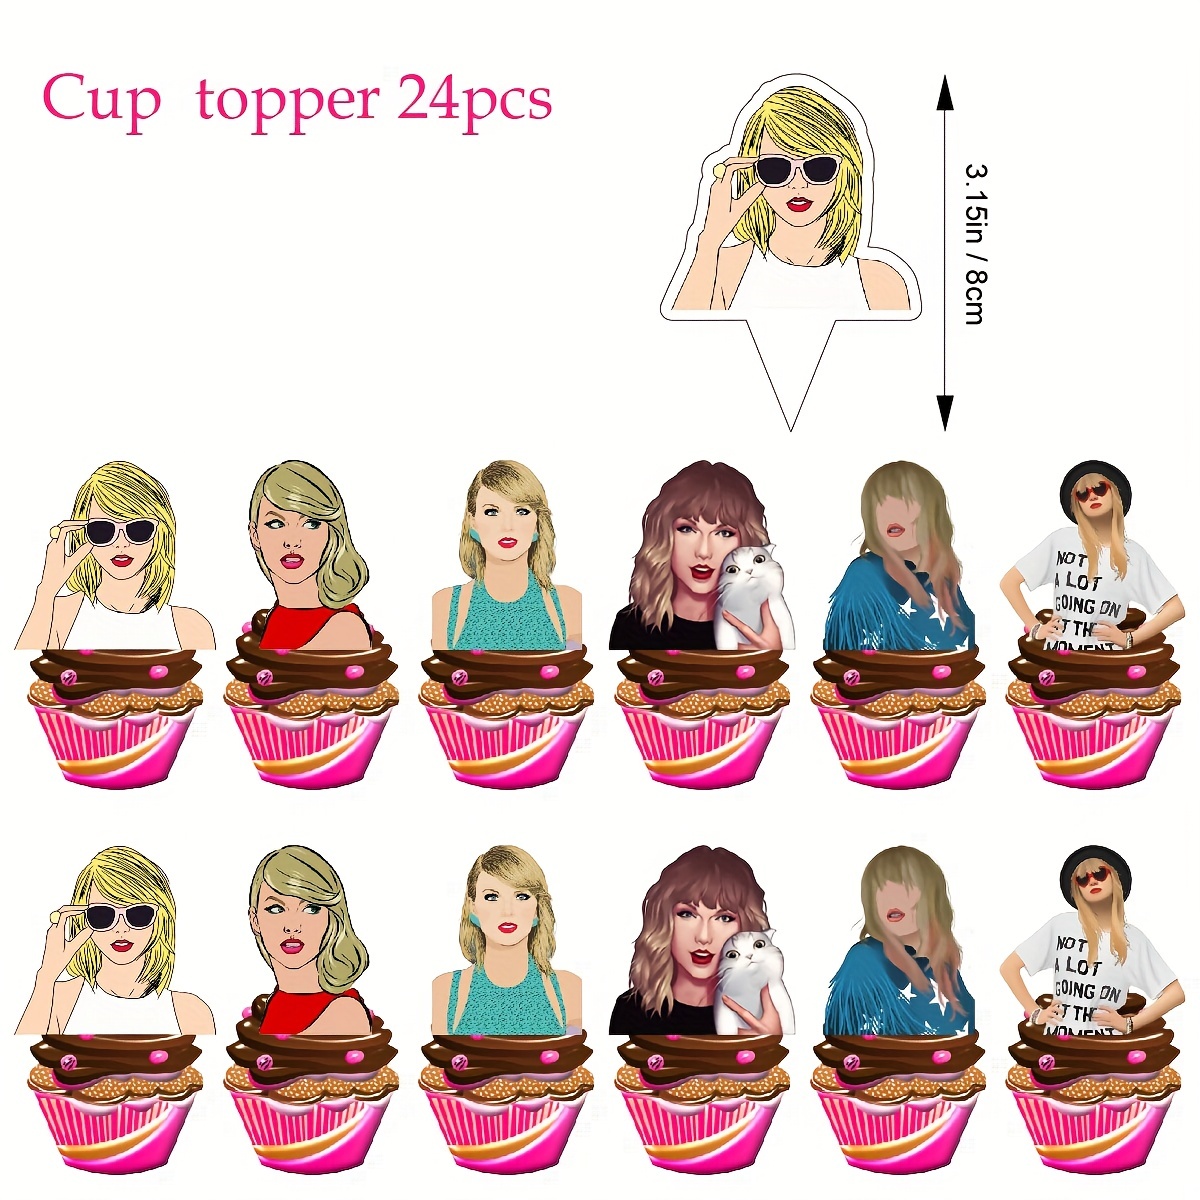  Taylor Birthday Decorations,Swift 1989 Themed Cutout Backdrop  Party Decorations, Swifties Party Supplies Favors Gift Room Decor,46pcs  Banner Balloons Cake Cupcake Topper Set : Toys & Games